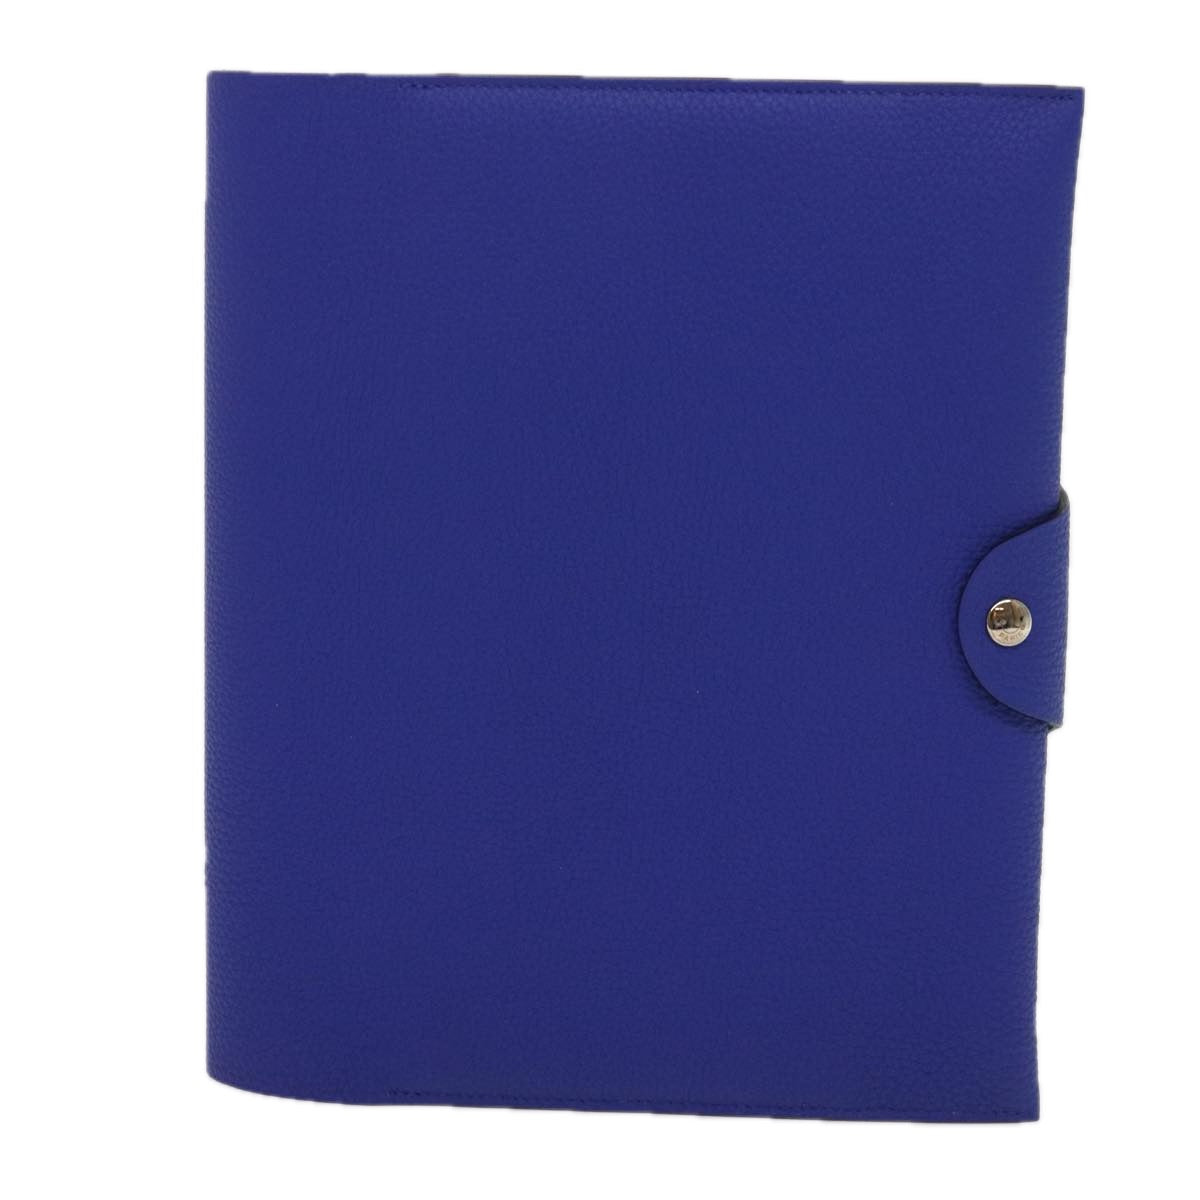 HERMES Uris Neo MM Day Planner Cover Leather Blue Auth 61676A - 0